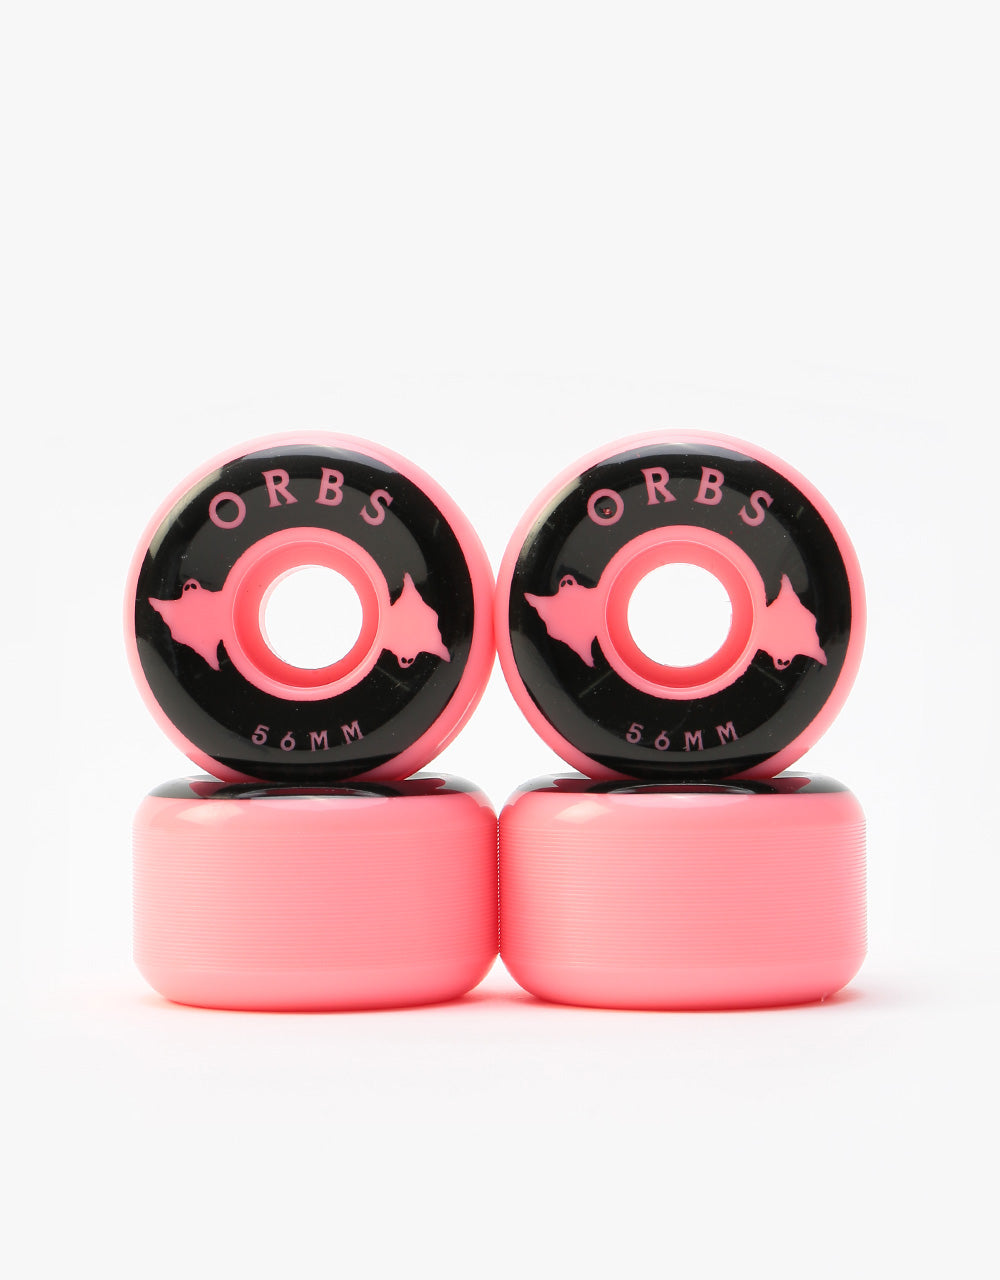 Orbs Specters Solids Conical 99a Skateboard Wheel - 56mm